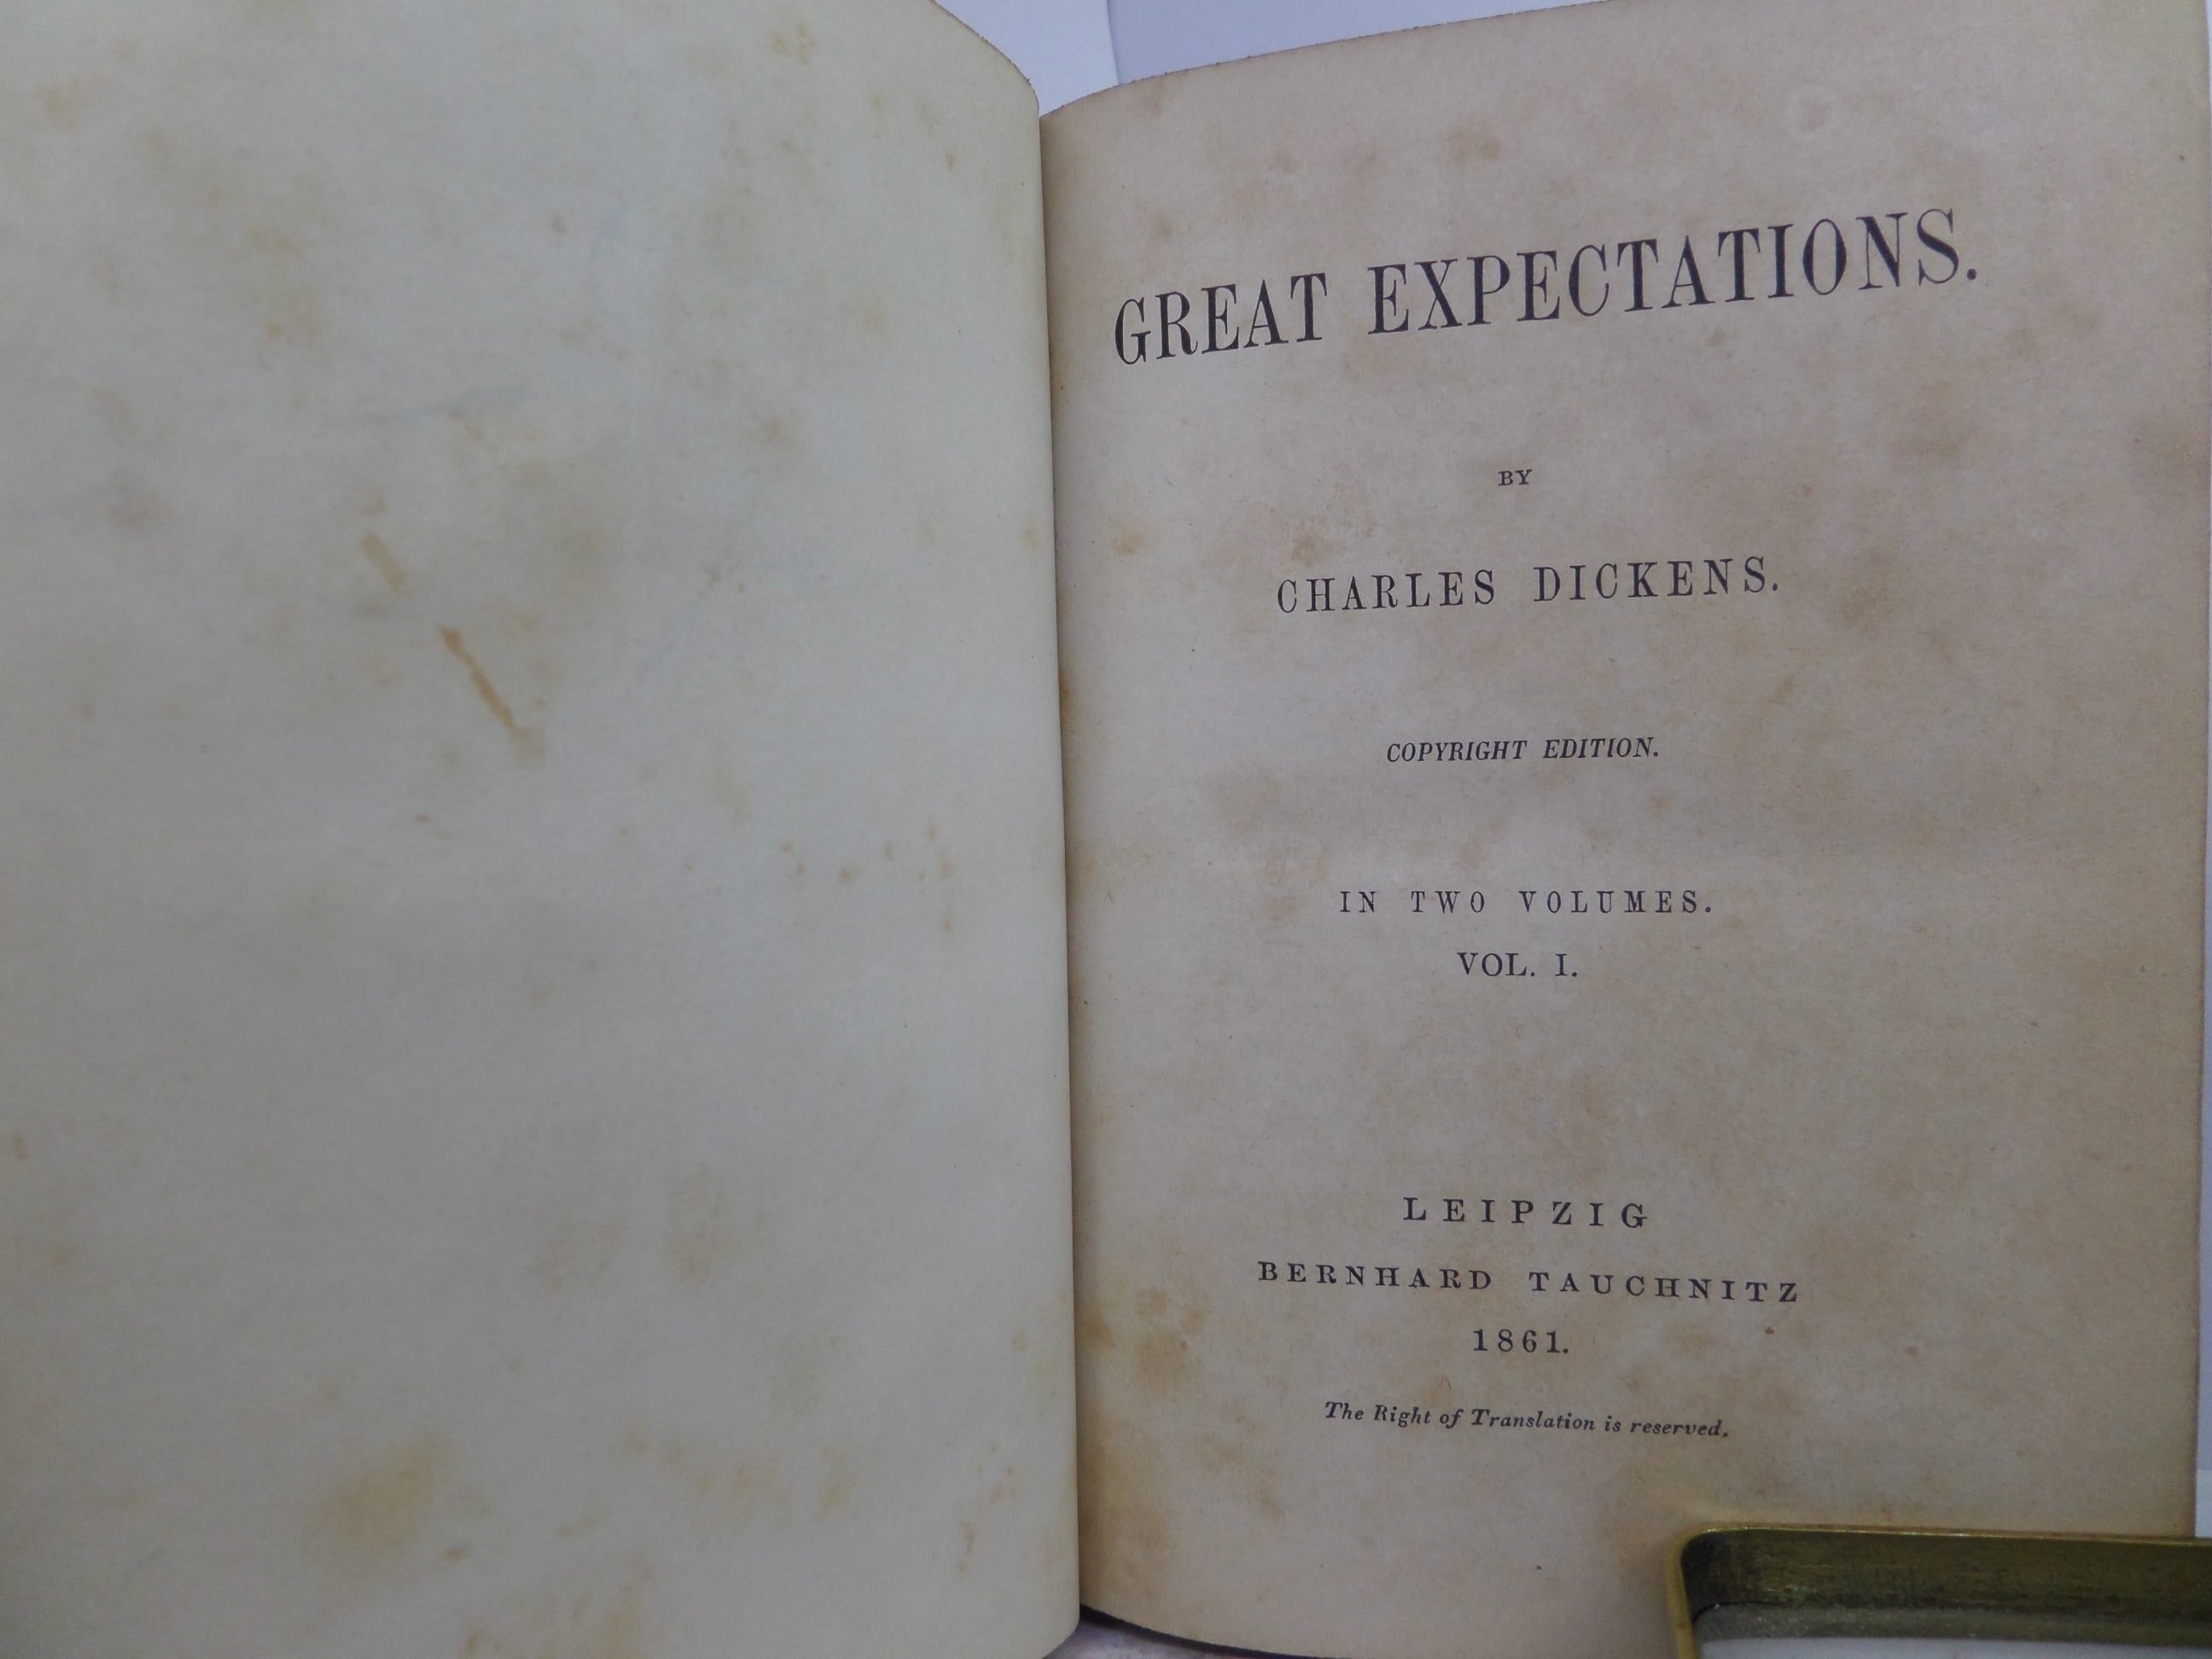 GREAT EXPECTATIONS BY CHARLES DICKENS 1861 FINE LEATHER BINDING